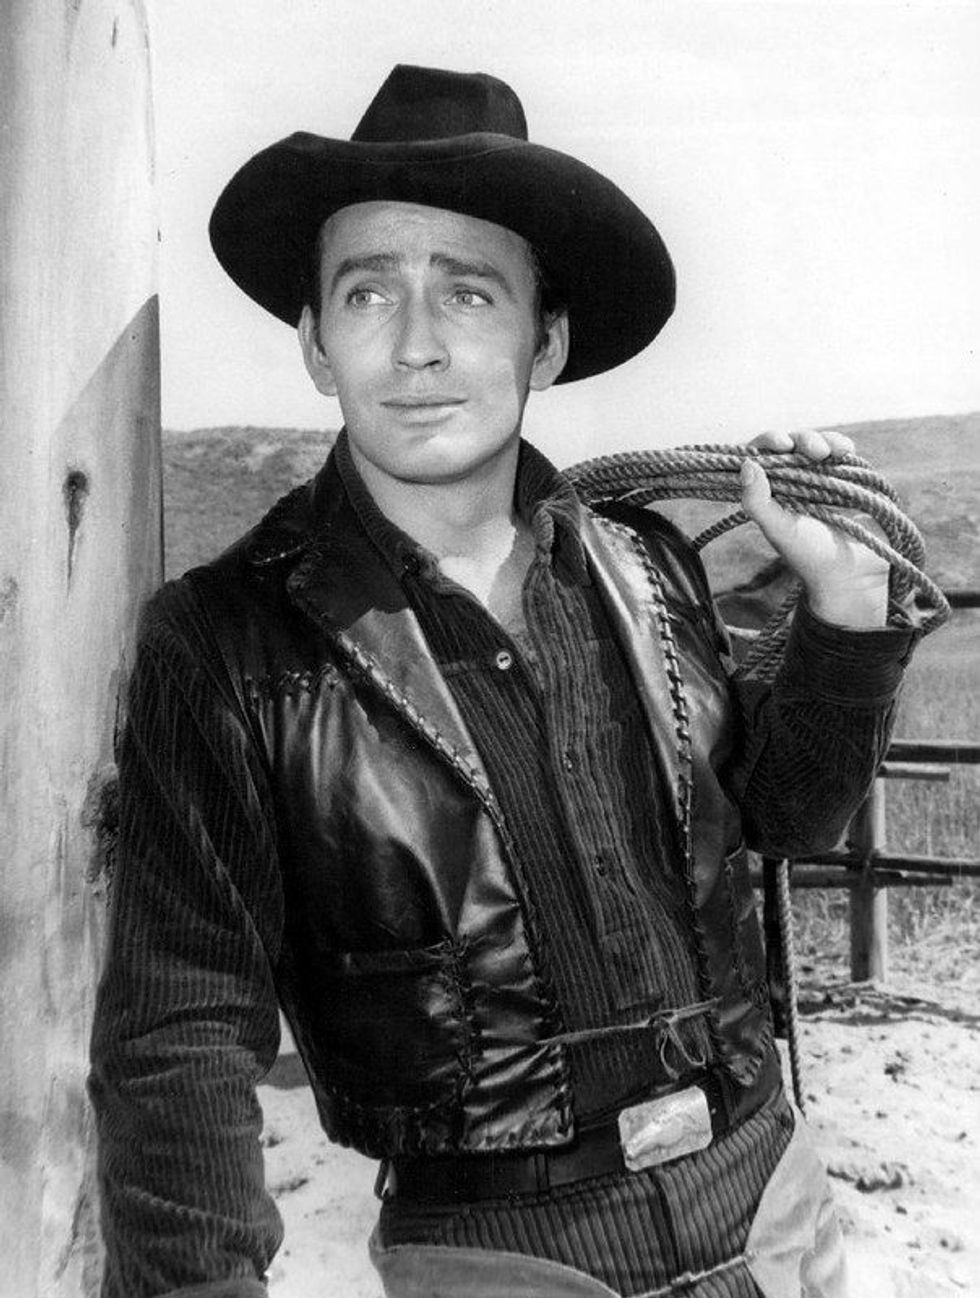 Here are some facts about the actor James Drury that you didn't know before!